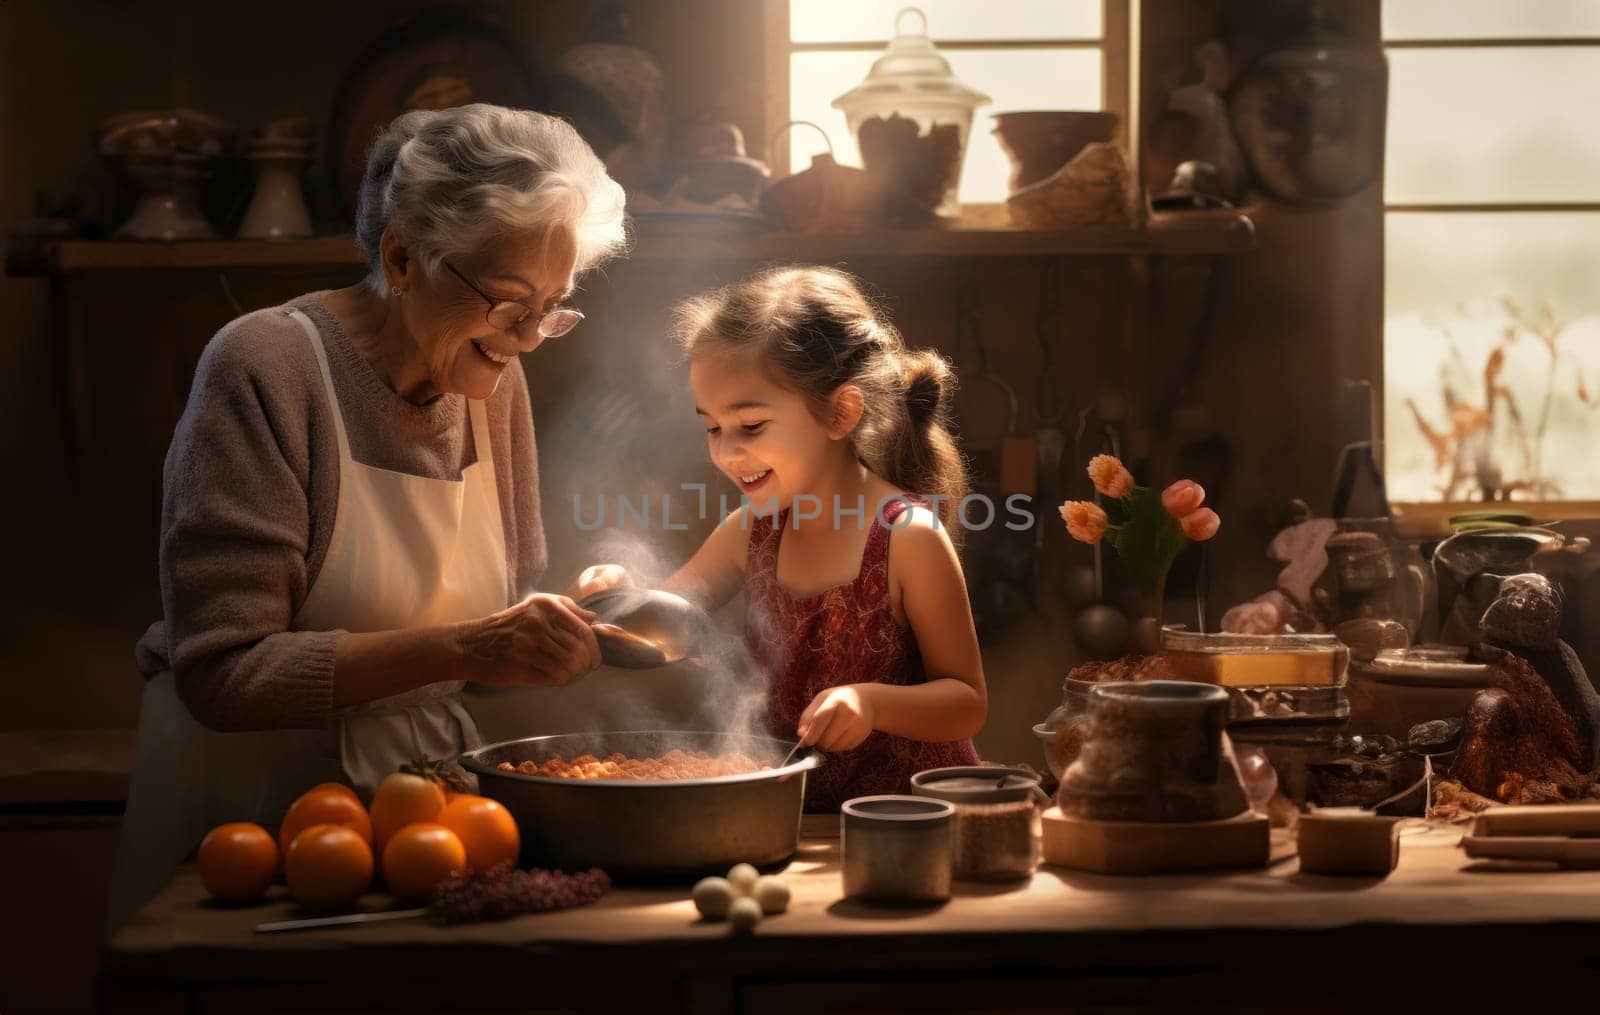 In the cozy warmth of home, a grandmother and her grandchild share a special bond as they cook together, passing on traditions, creating memories, and cherishing each other's company.Generated image by dotshock